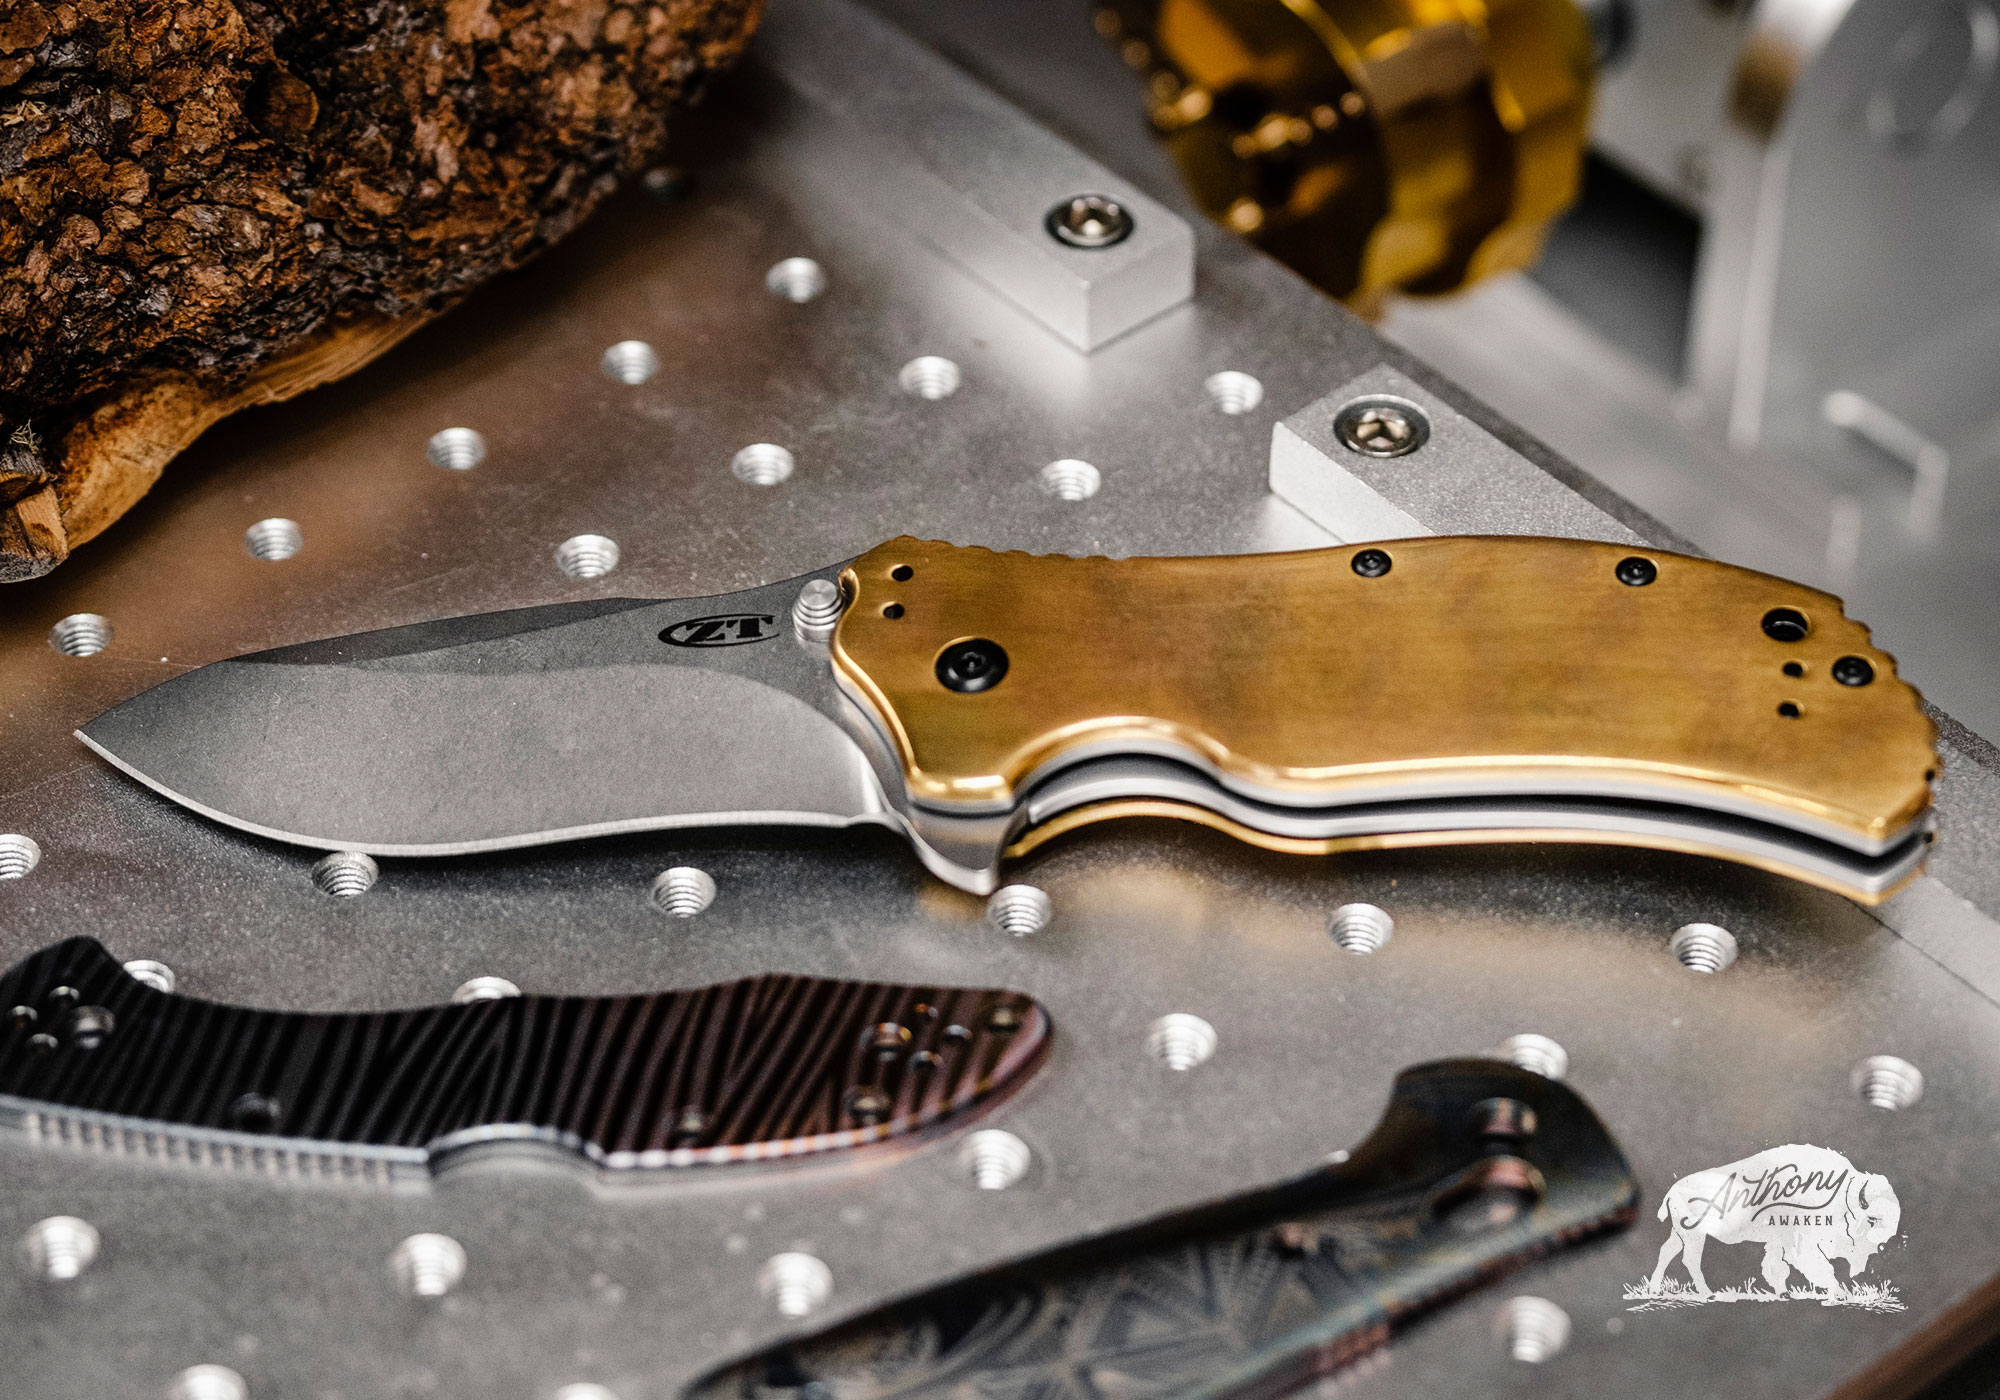 Shop SMOKY MOUNTAIN KNIFE WORKS INC. and Buy Now Pay Later with Sezzle.